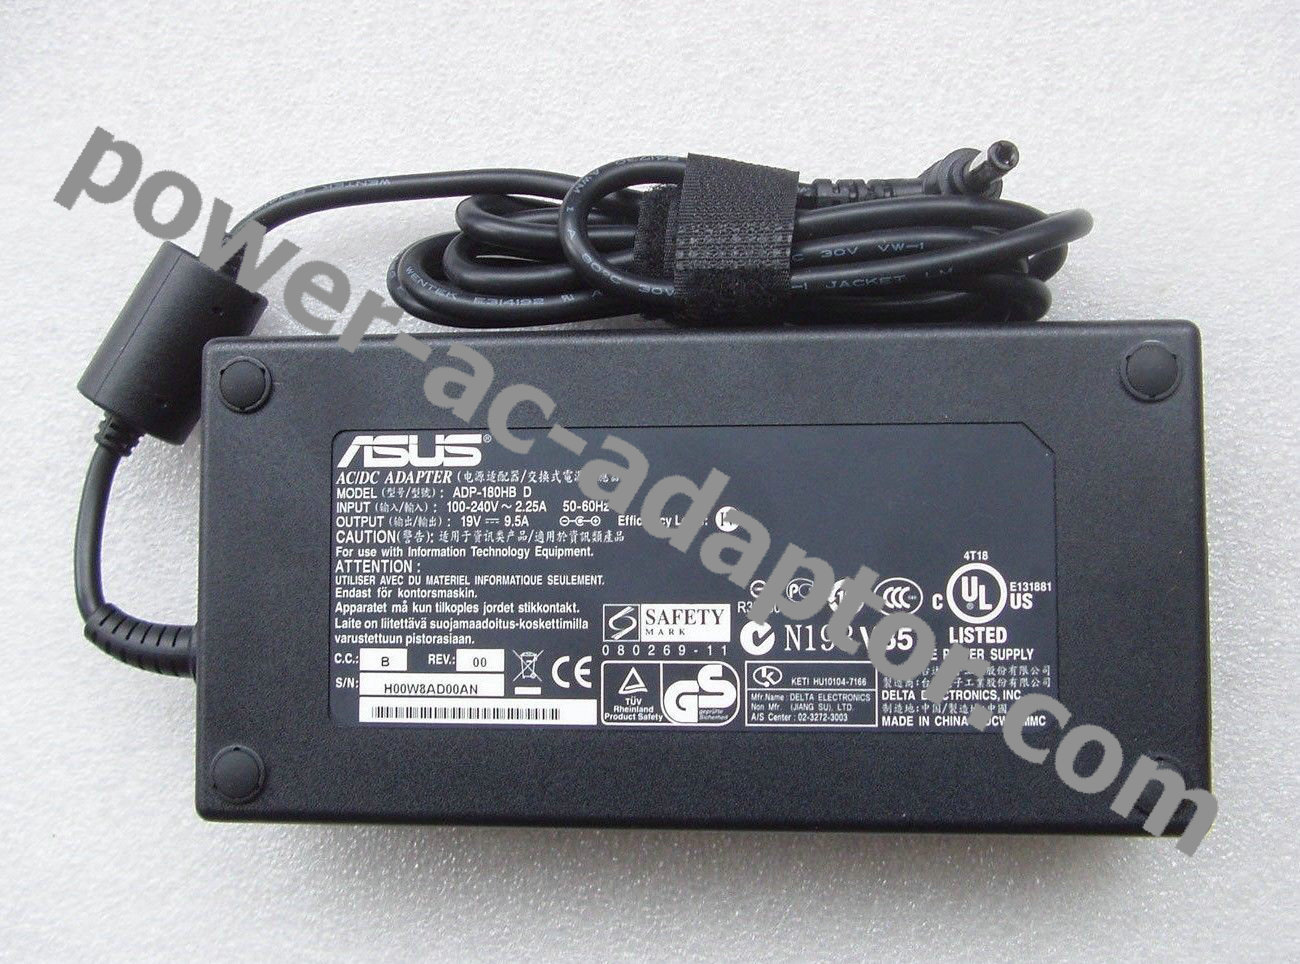 Genuine MSI GT60 GT70 ADP-180EB D 180W AC Power Adapter Charger